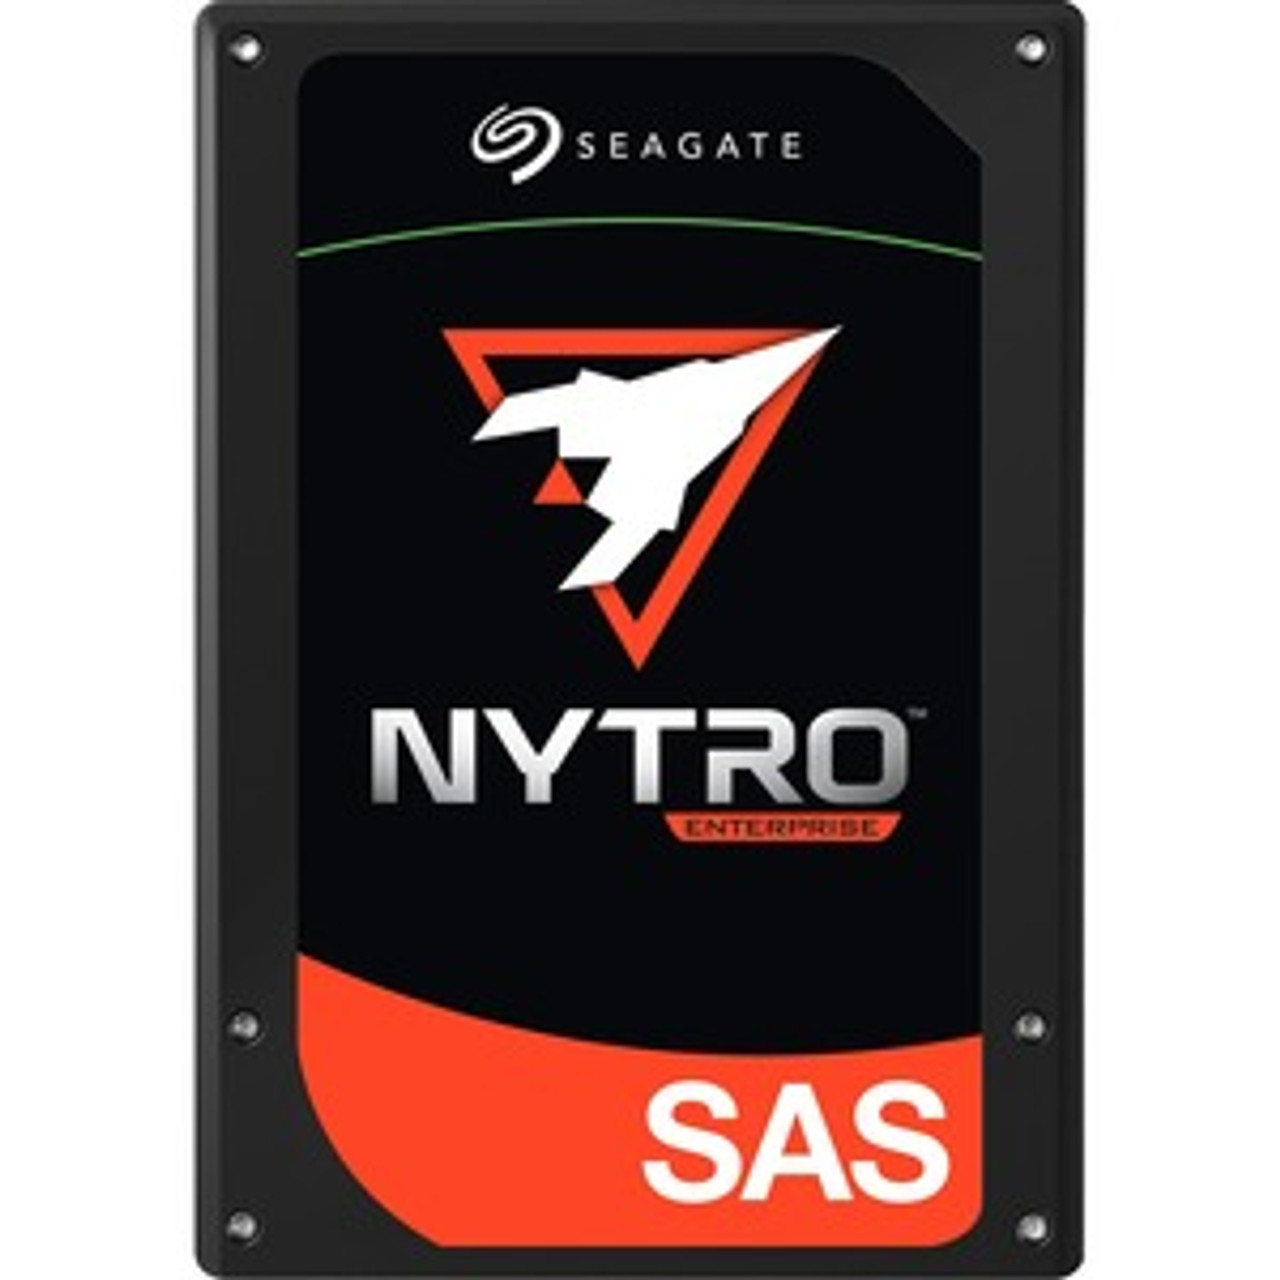 XS3840SE10103-5PK Seagate Nytro 3330 3.84TB eTLC SAS 12Gbps Scaled Endurance 2.5-inch Internal Solid State Drive (SSD) (5-Pack)